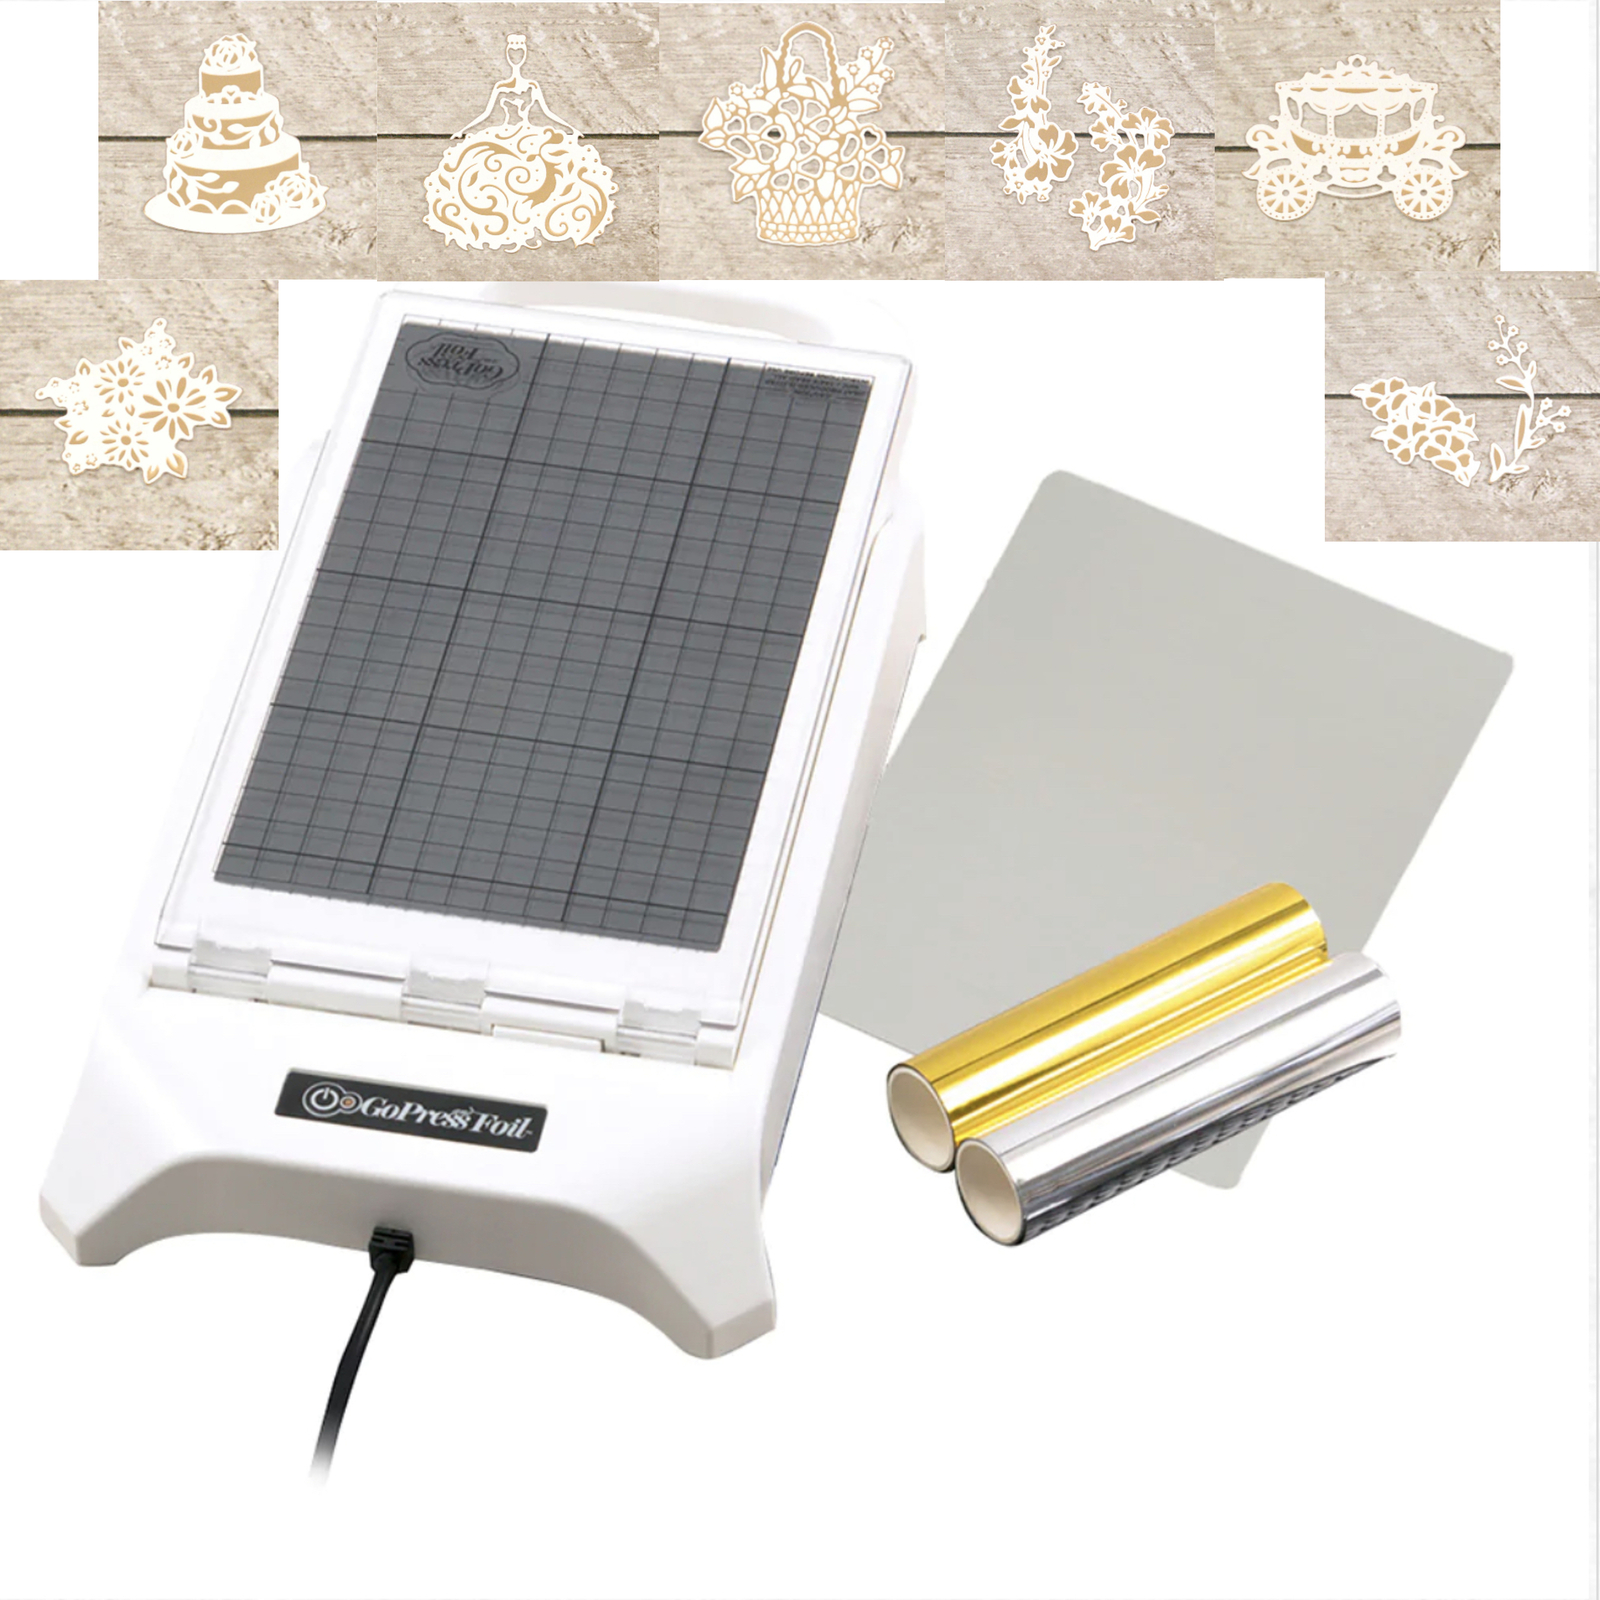 GoPress & Foil Machine with Hotfoil Stamps Bundle